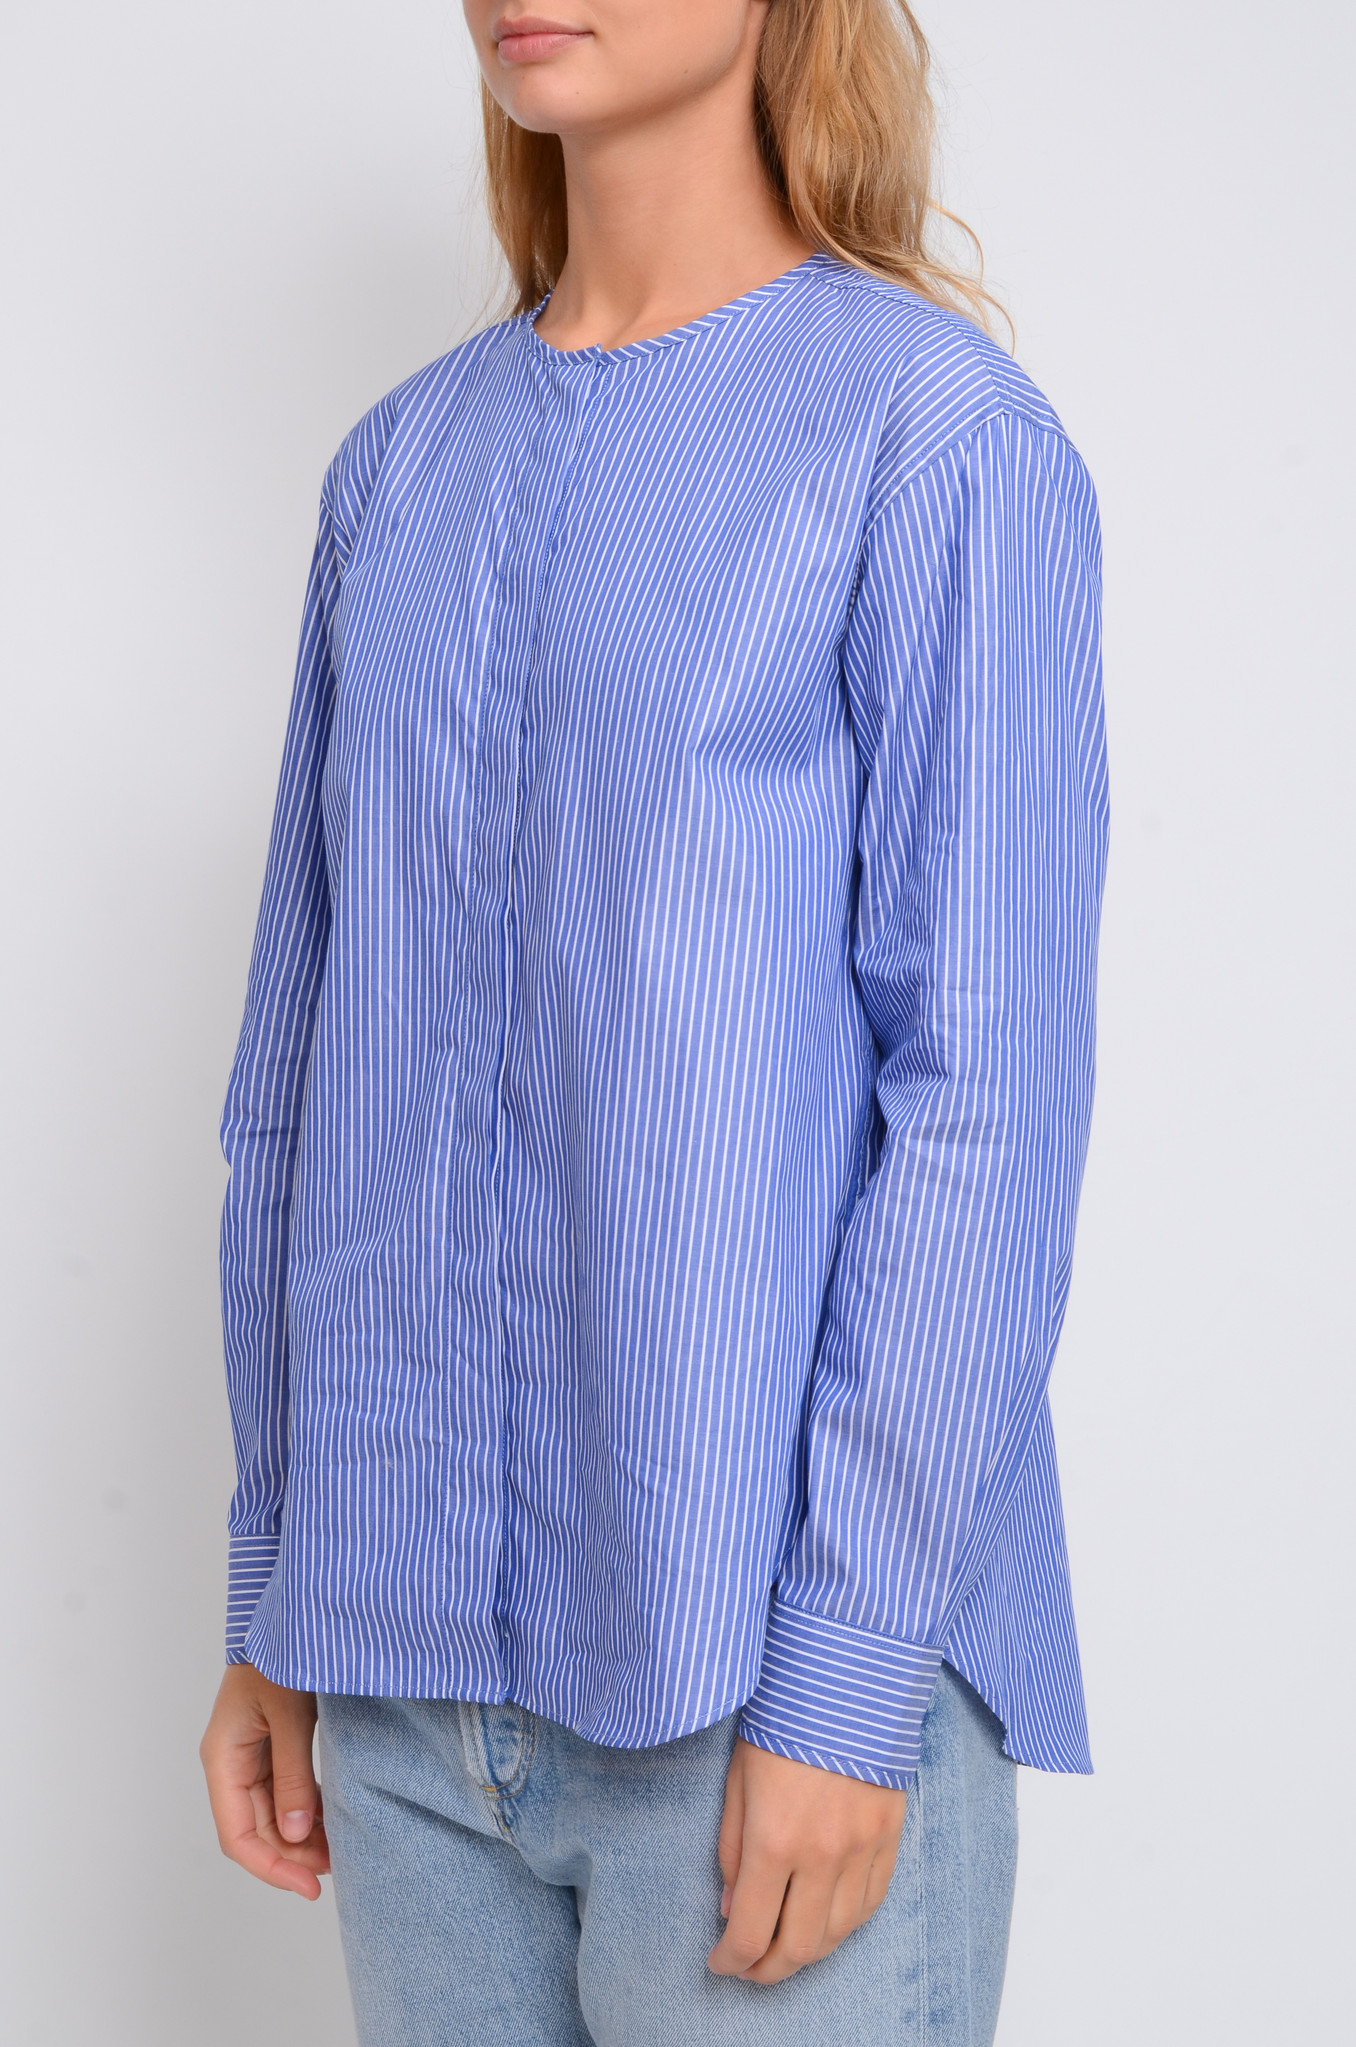 COLLARLESS BLOUSE IN GALAXY BLUE-4